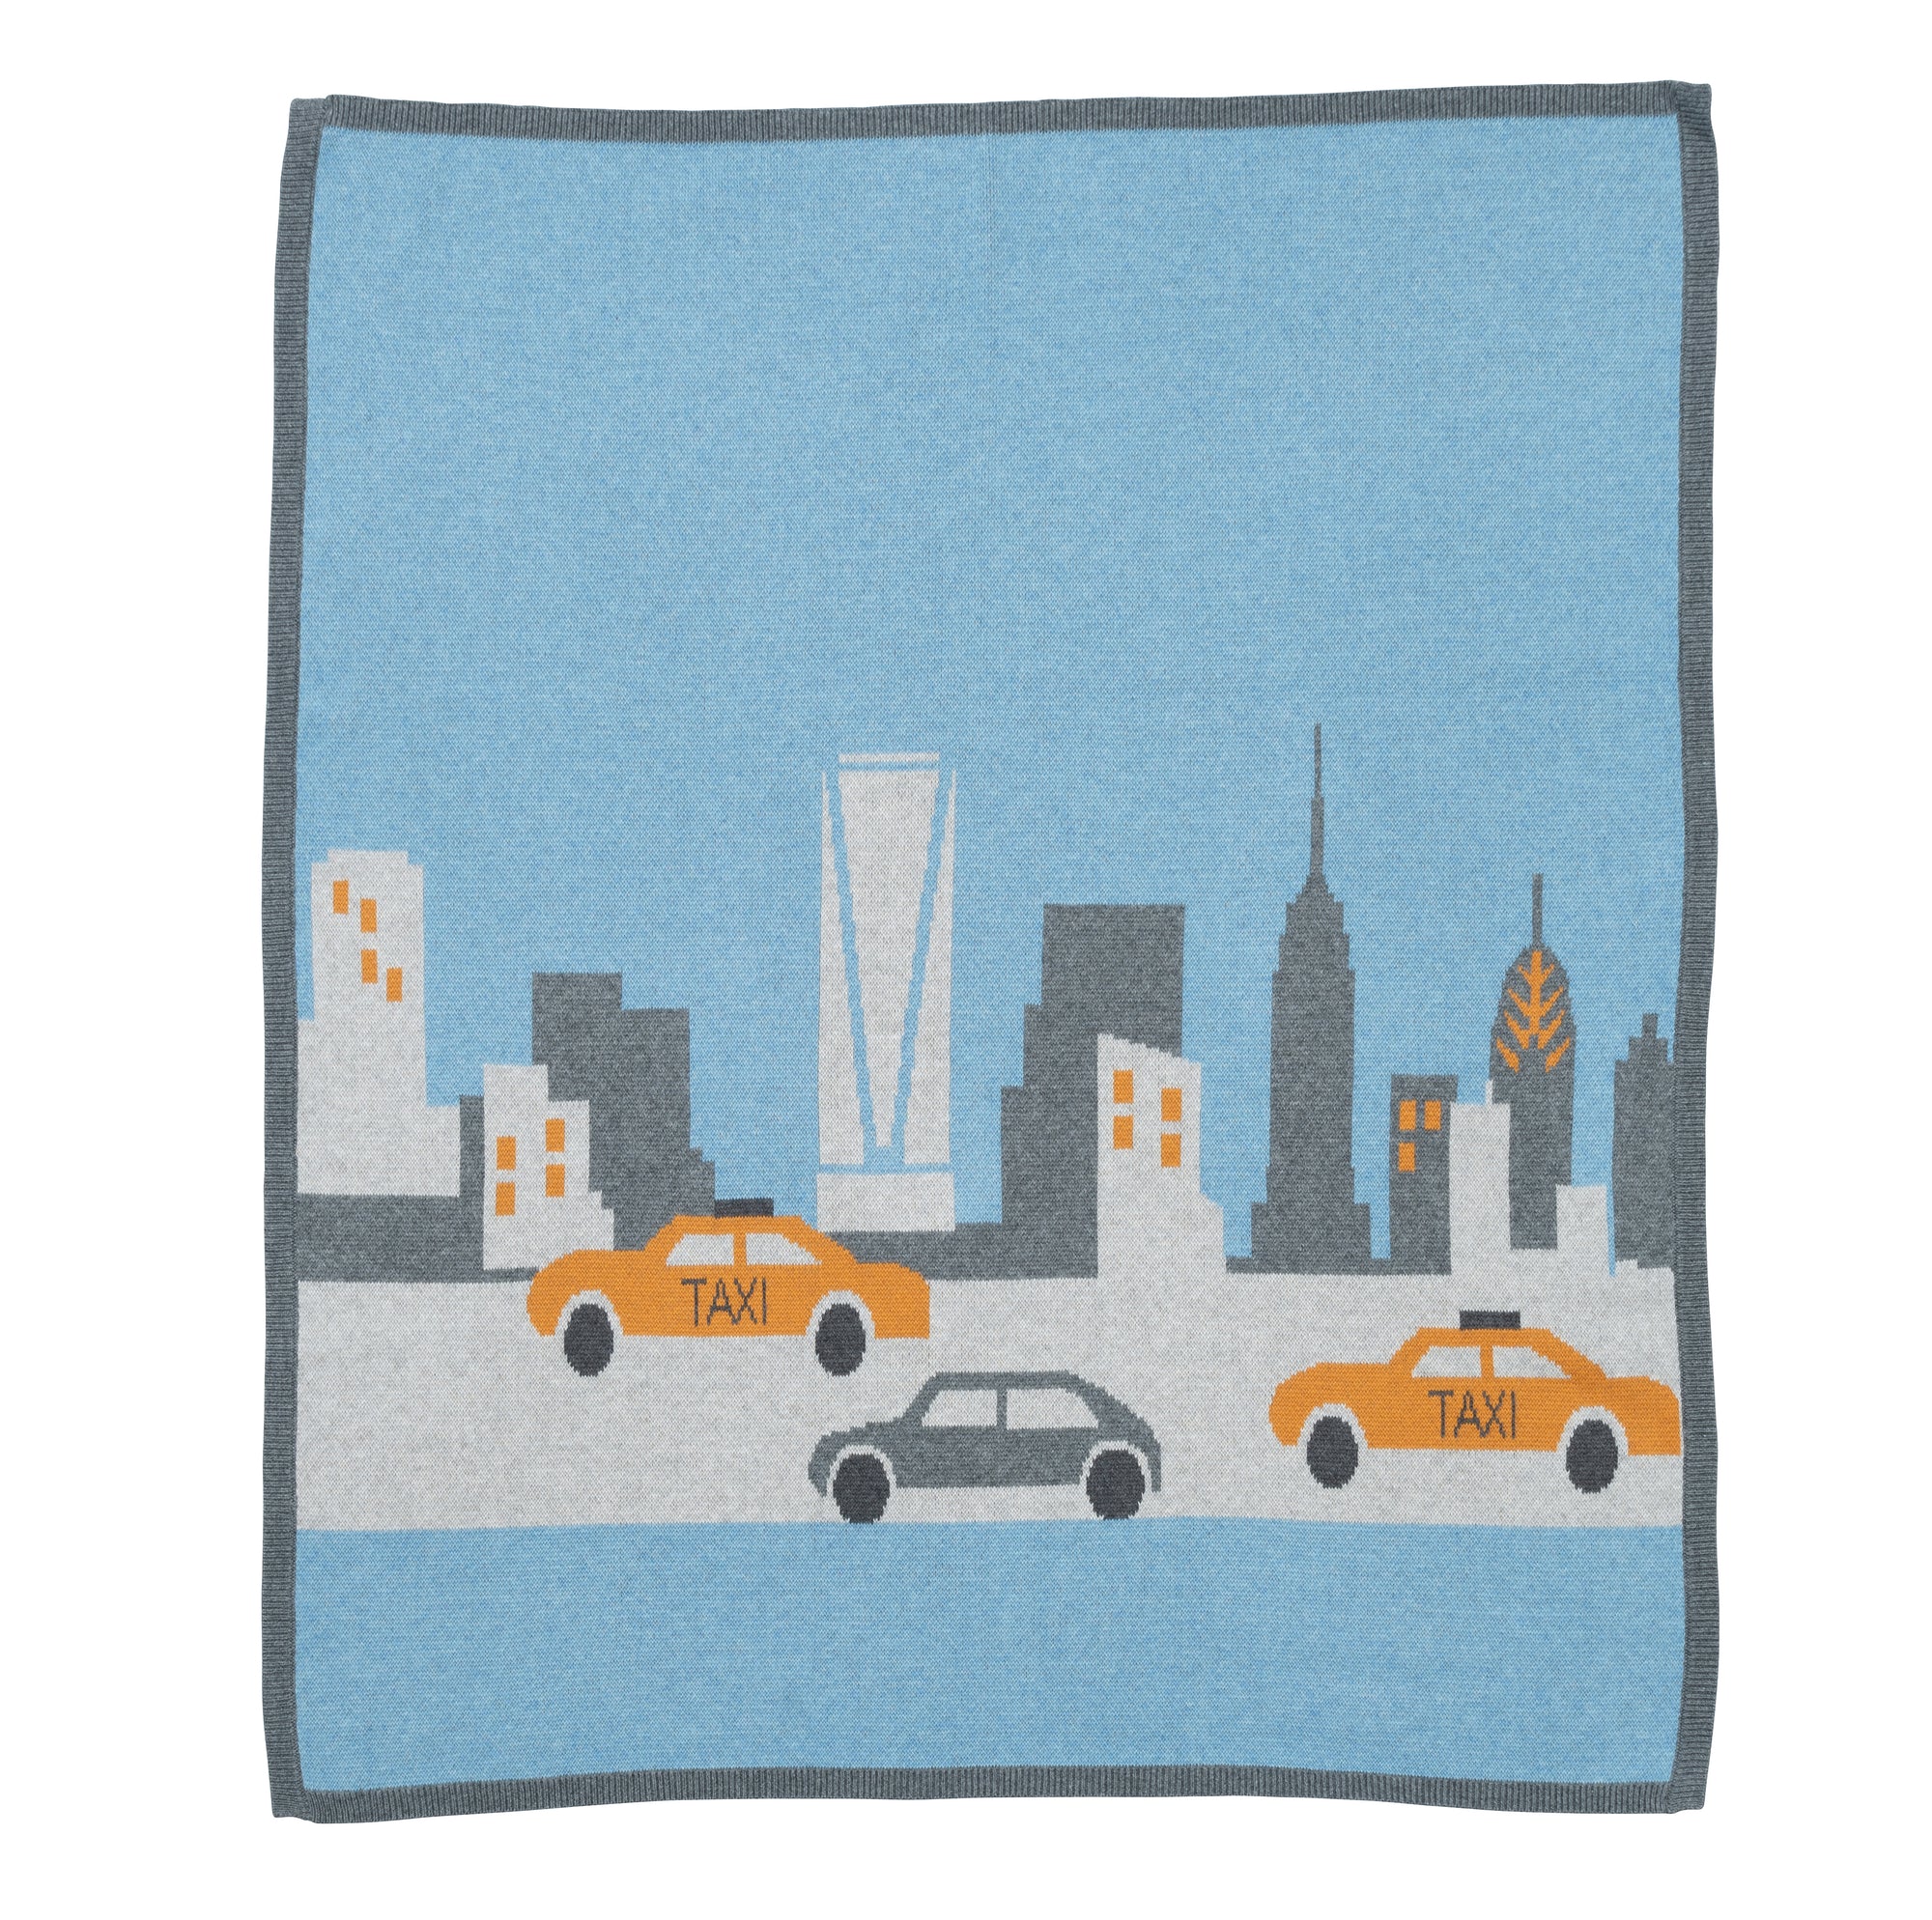 Heather chambray blue blanket featuring iconic yellow taxis and skyline of New York City by Lucky Jade Kids. cotton cozy blanket featuring NYC taxi blanket #luckyjadekids #kidsclothingboutique #babyoutifts #kidsclothes #matchingdresses